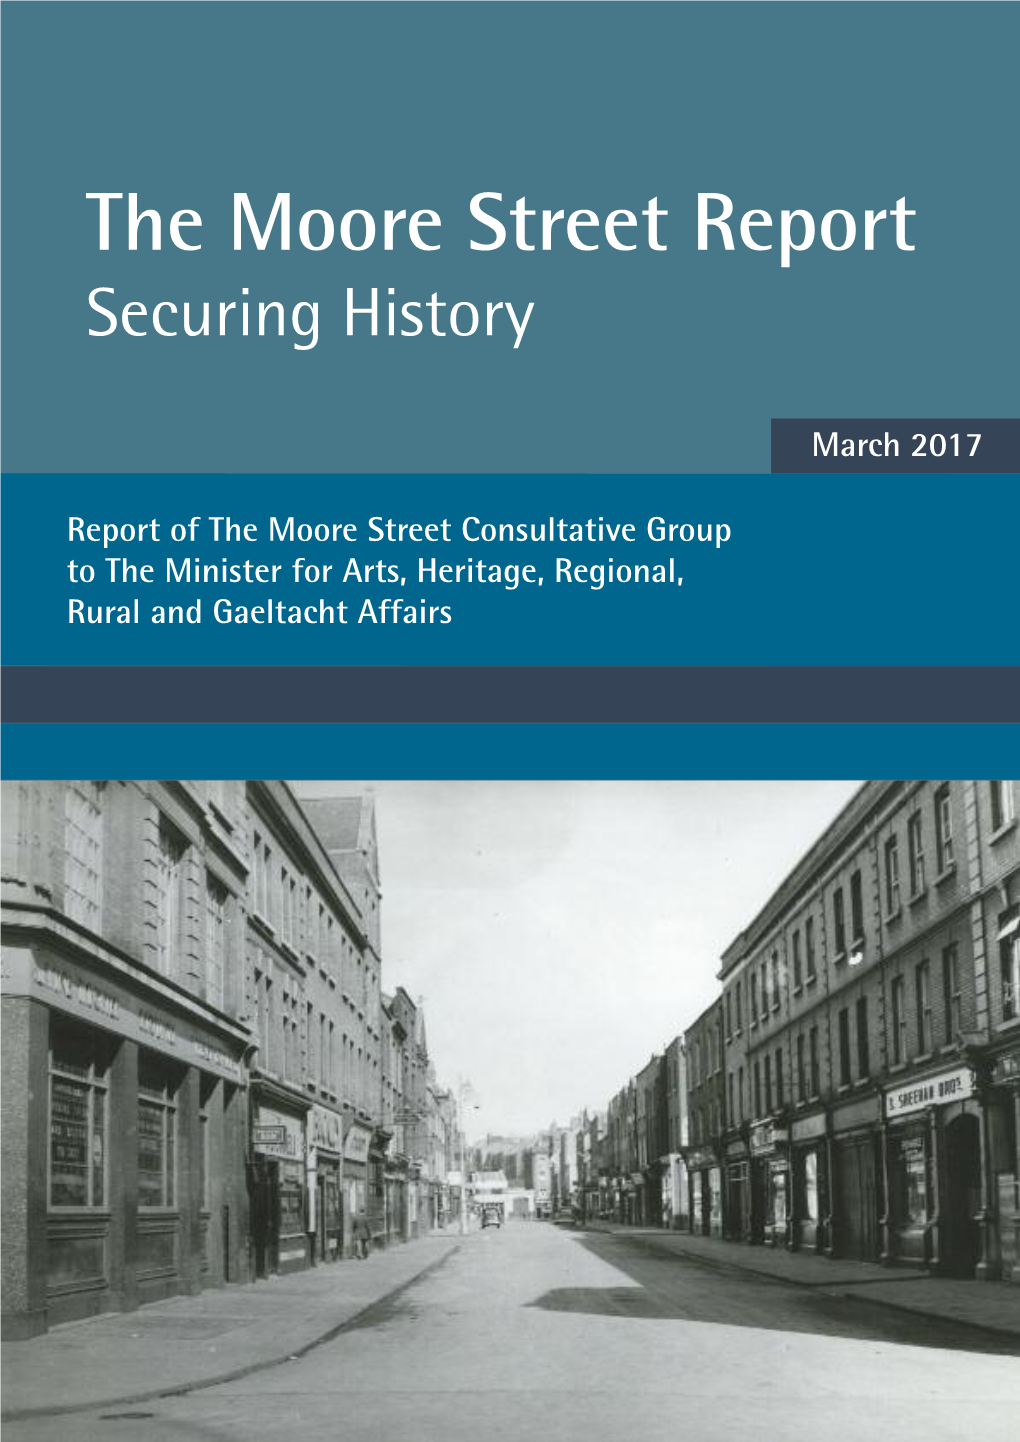 The Moore Street Report Securing History